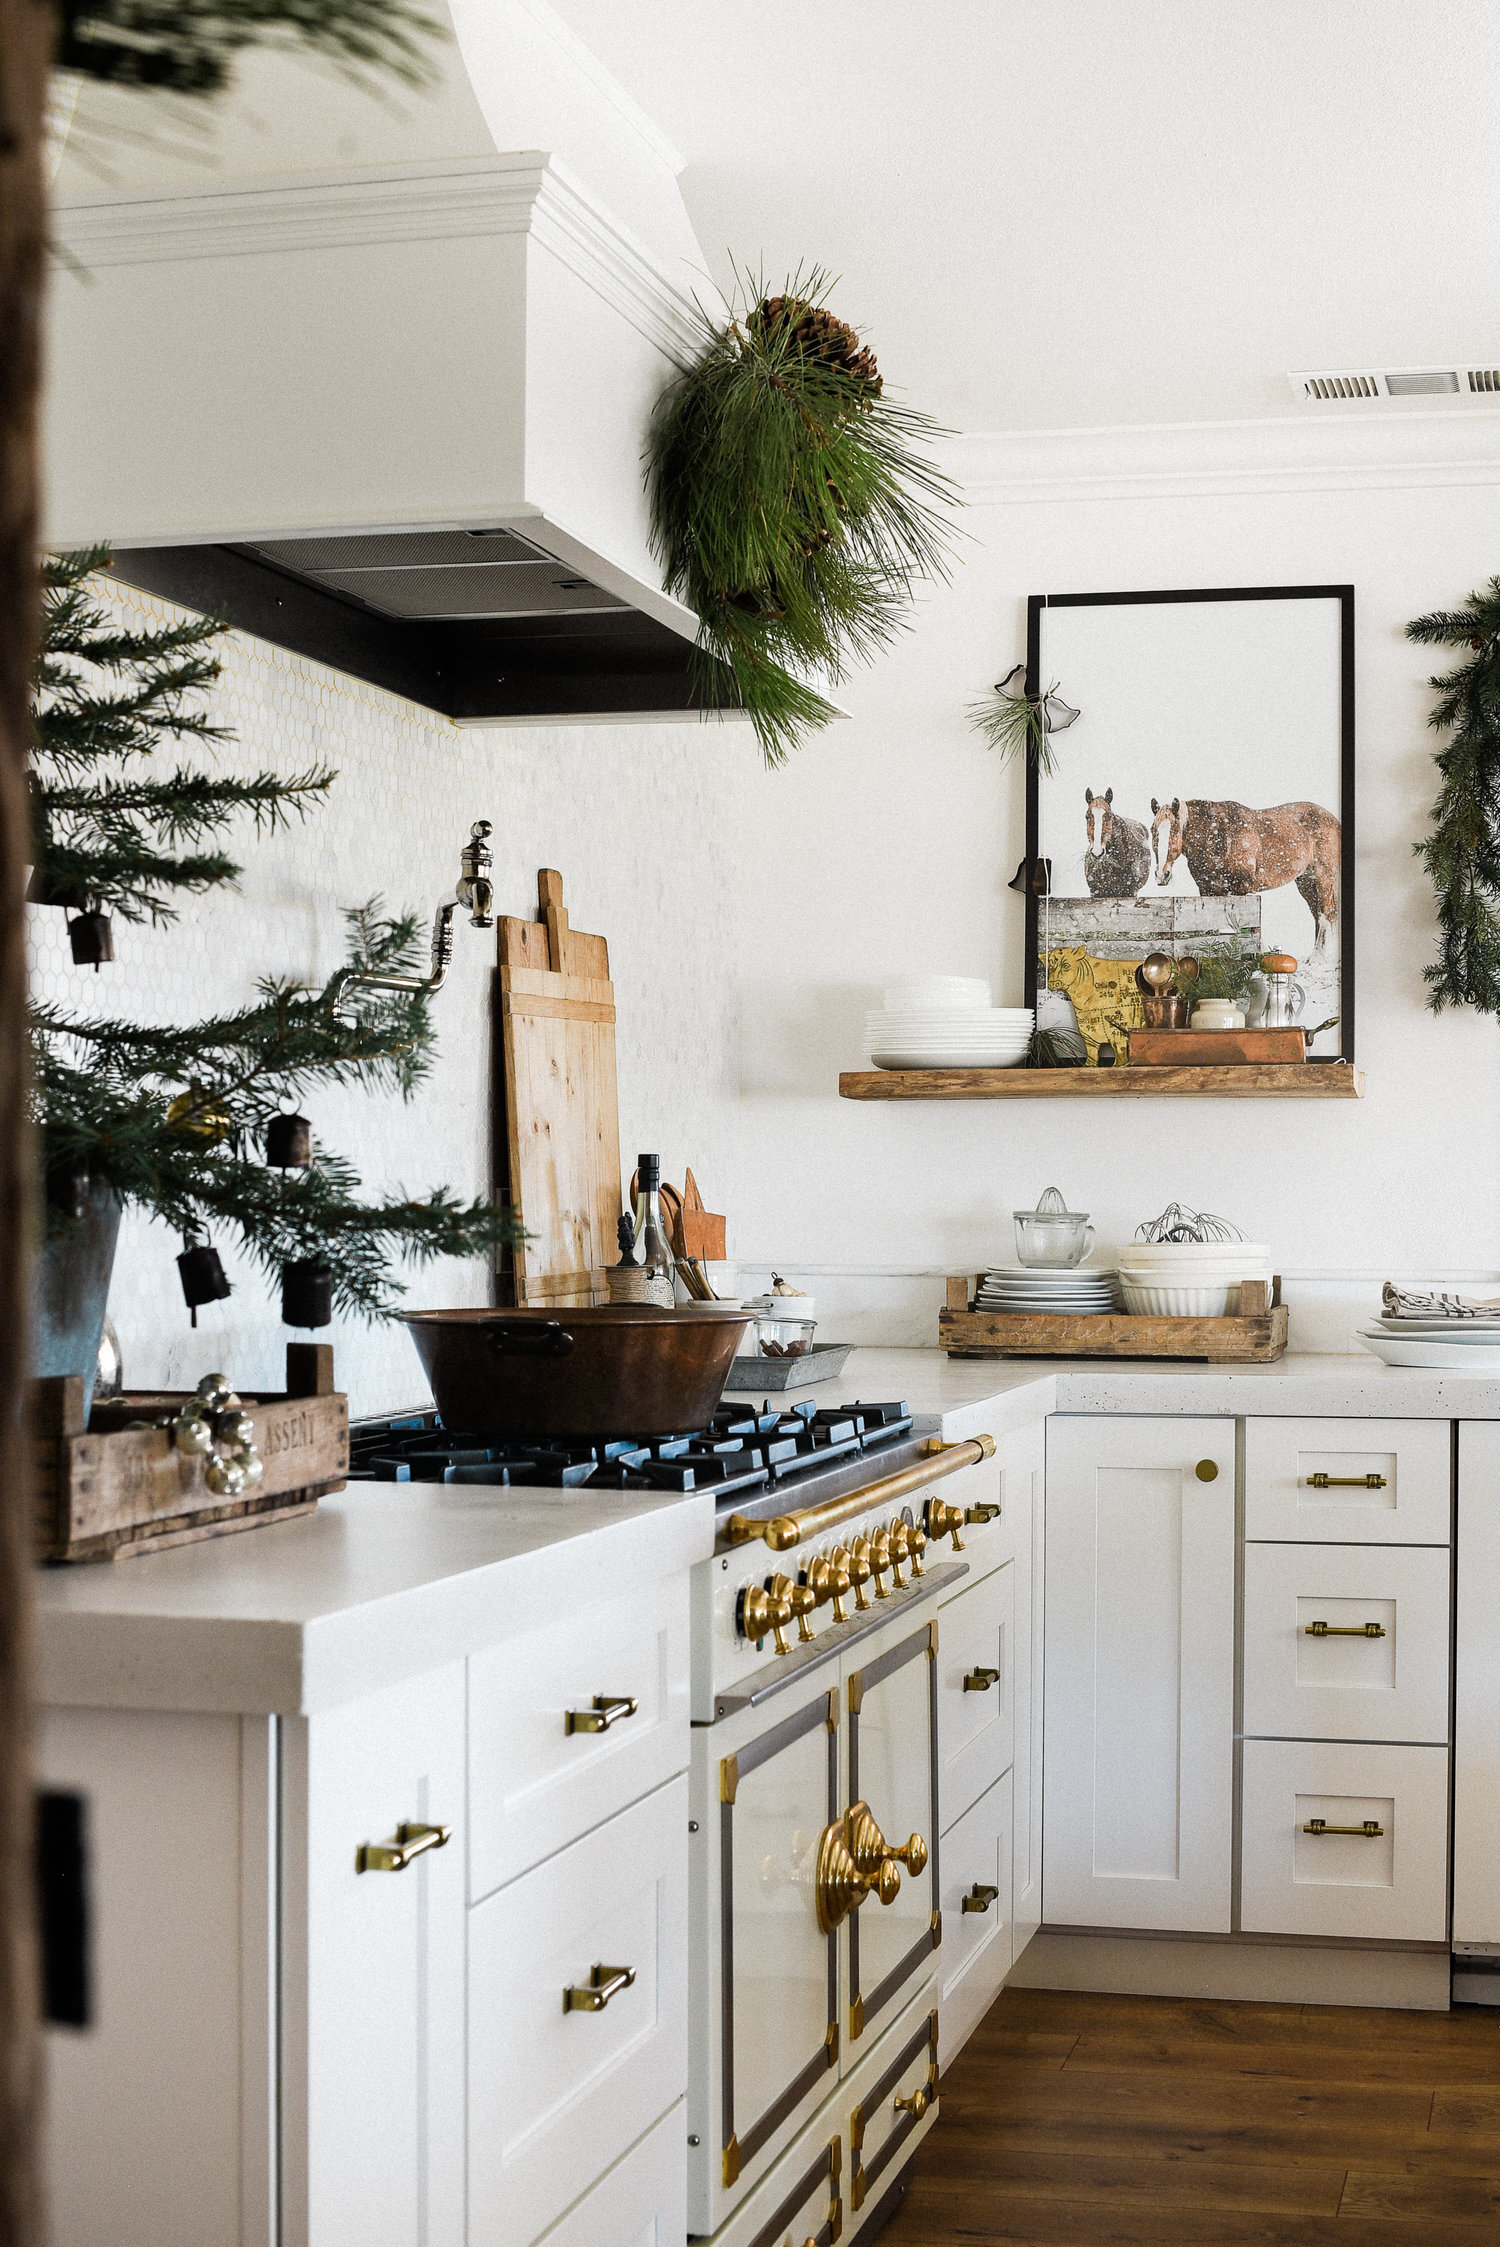 As we begin to deck the halls, here are some tips for keeping things simple and festive as you decorate for Christmas!